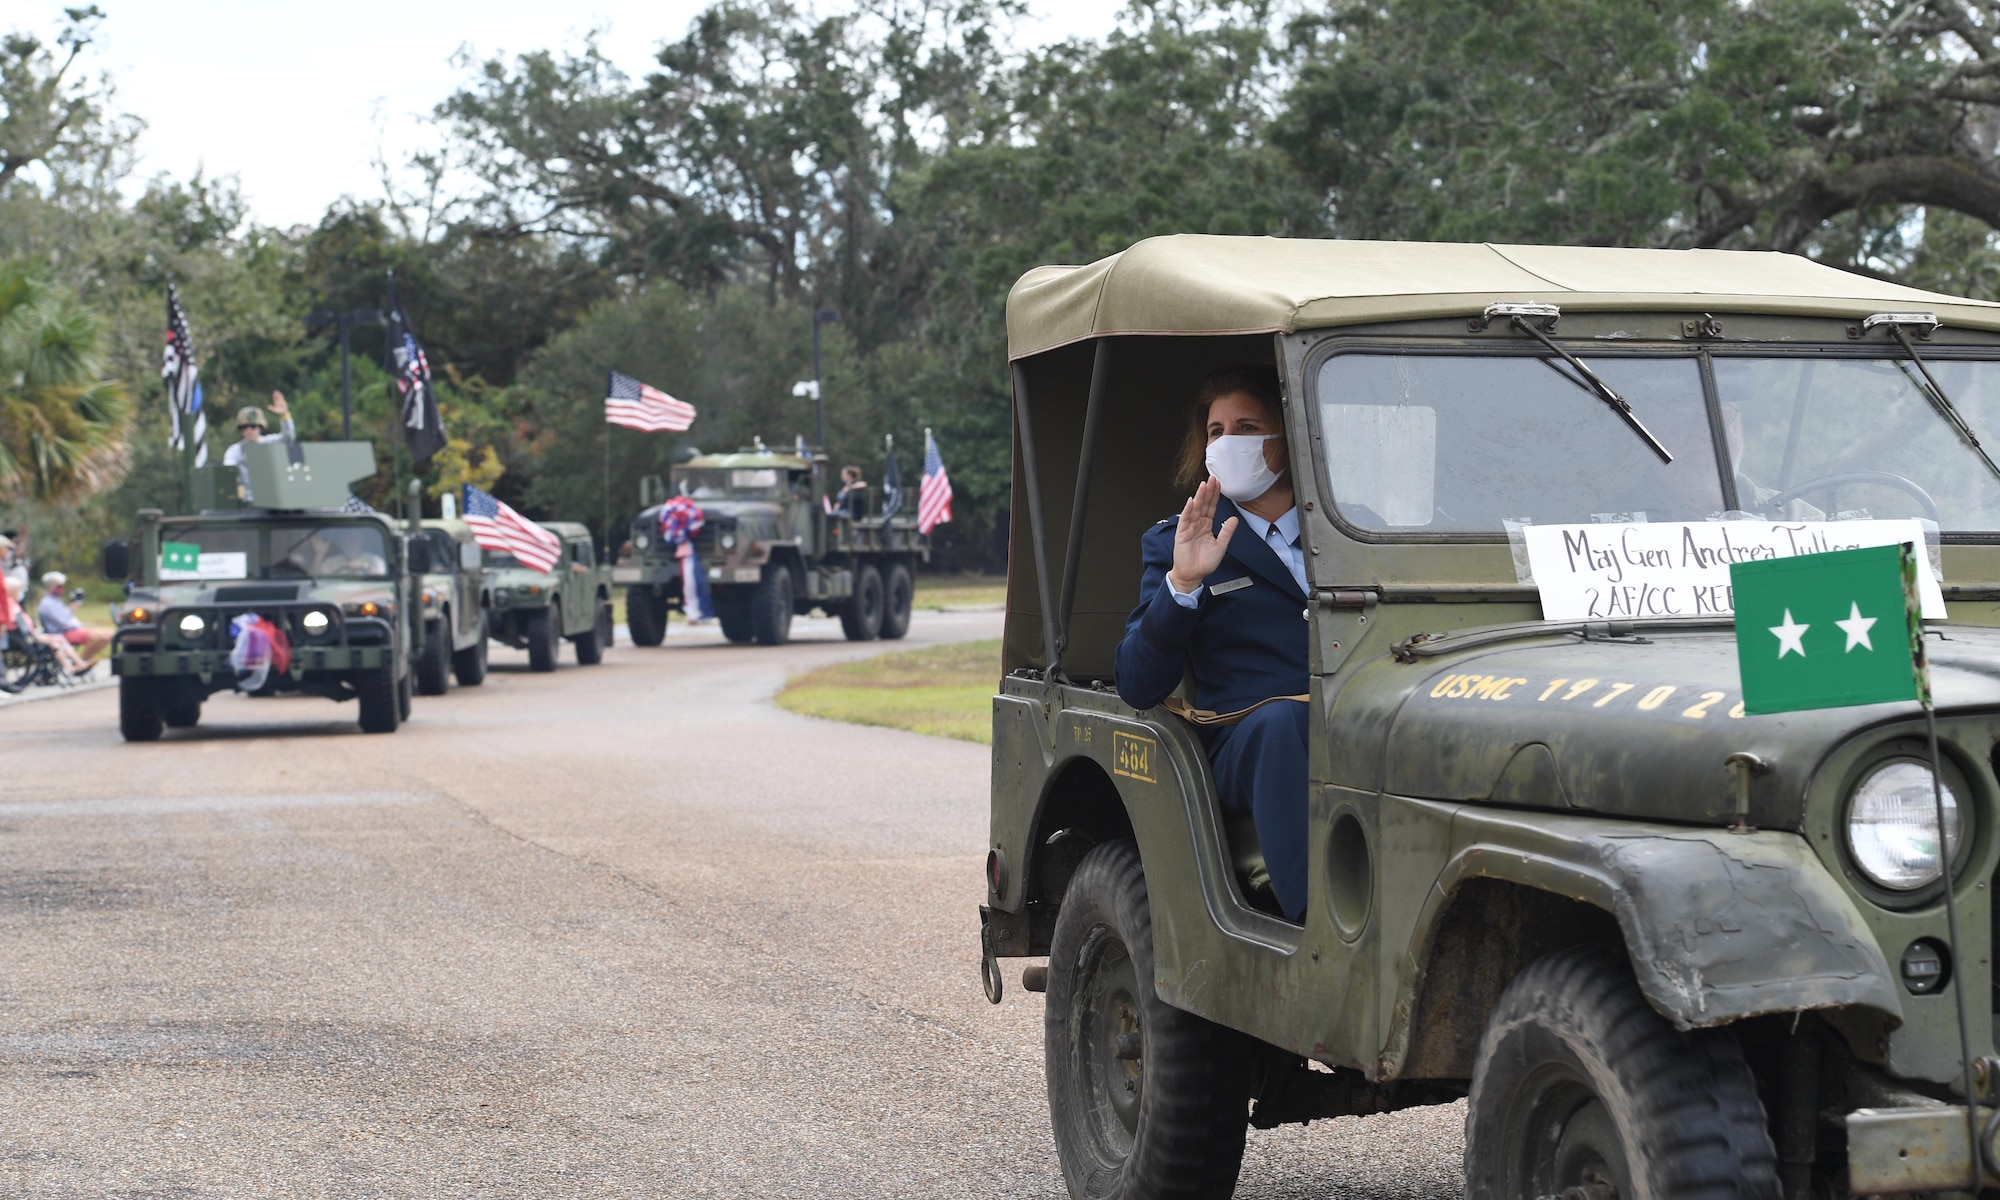 U.S. Air Force Maj. Gen. Andrea Tullos, Second Air Force commander, waves to veterans during the Gulf Coast Veteran's Day Roll-Thru and Wave Parade outside the Armed Forces Retirement Home at Gulfport, Mississippi, Nov. 7, 2020. Keesler Air Force Base leadership participated in the parade in support of all veterans past and present. (U.S. Air Force photo by Kemberly Groue)